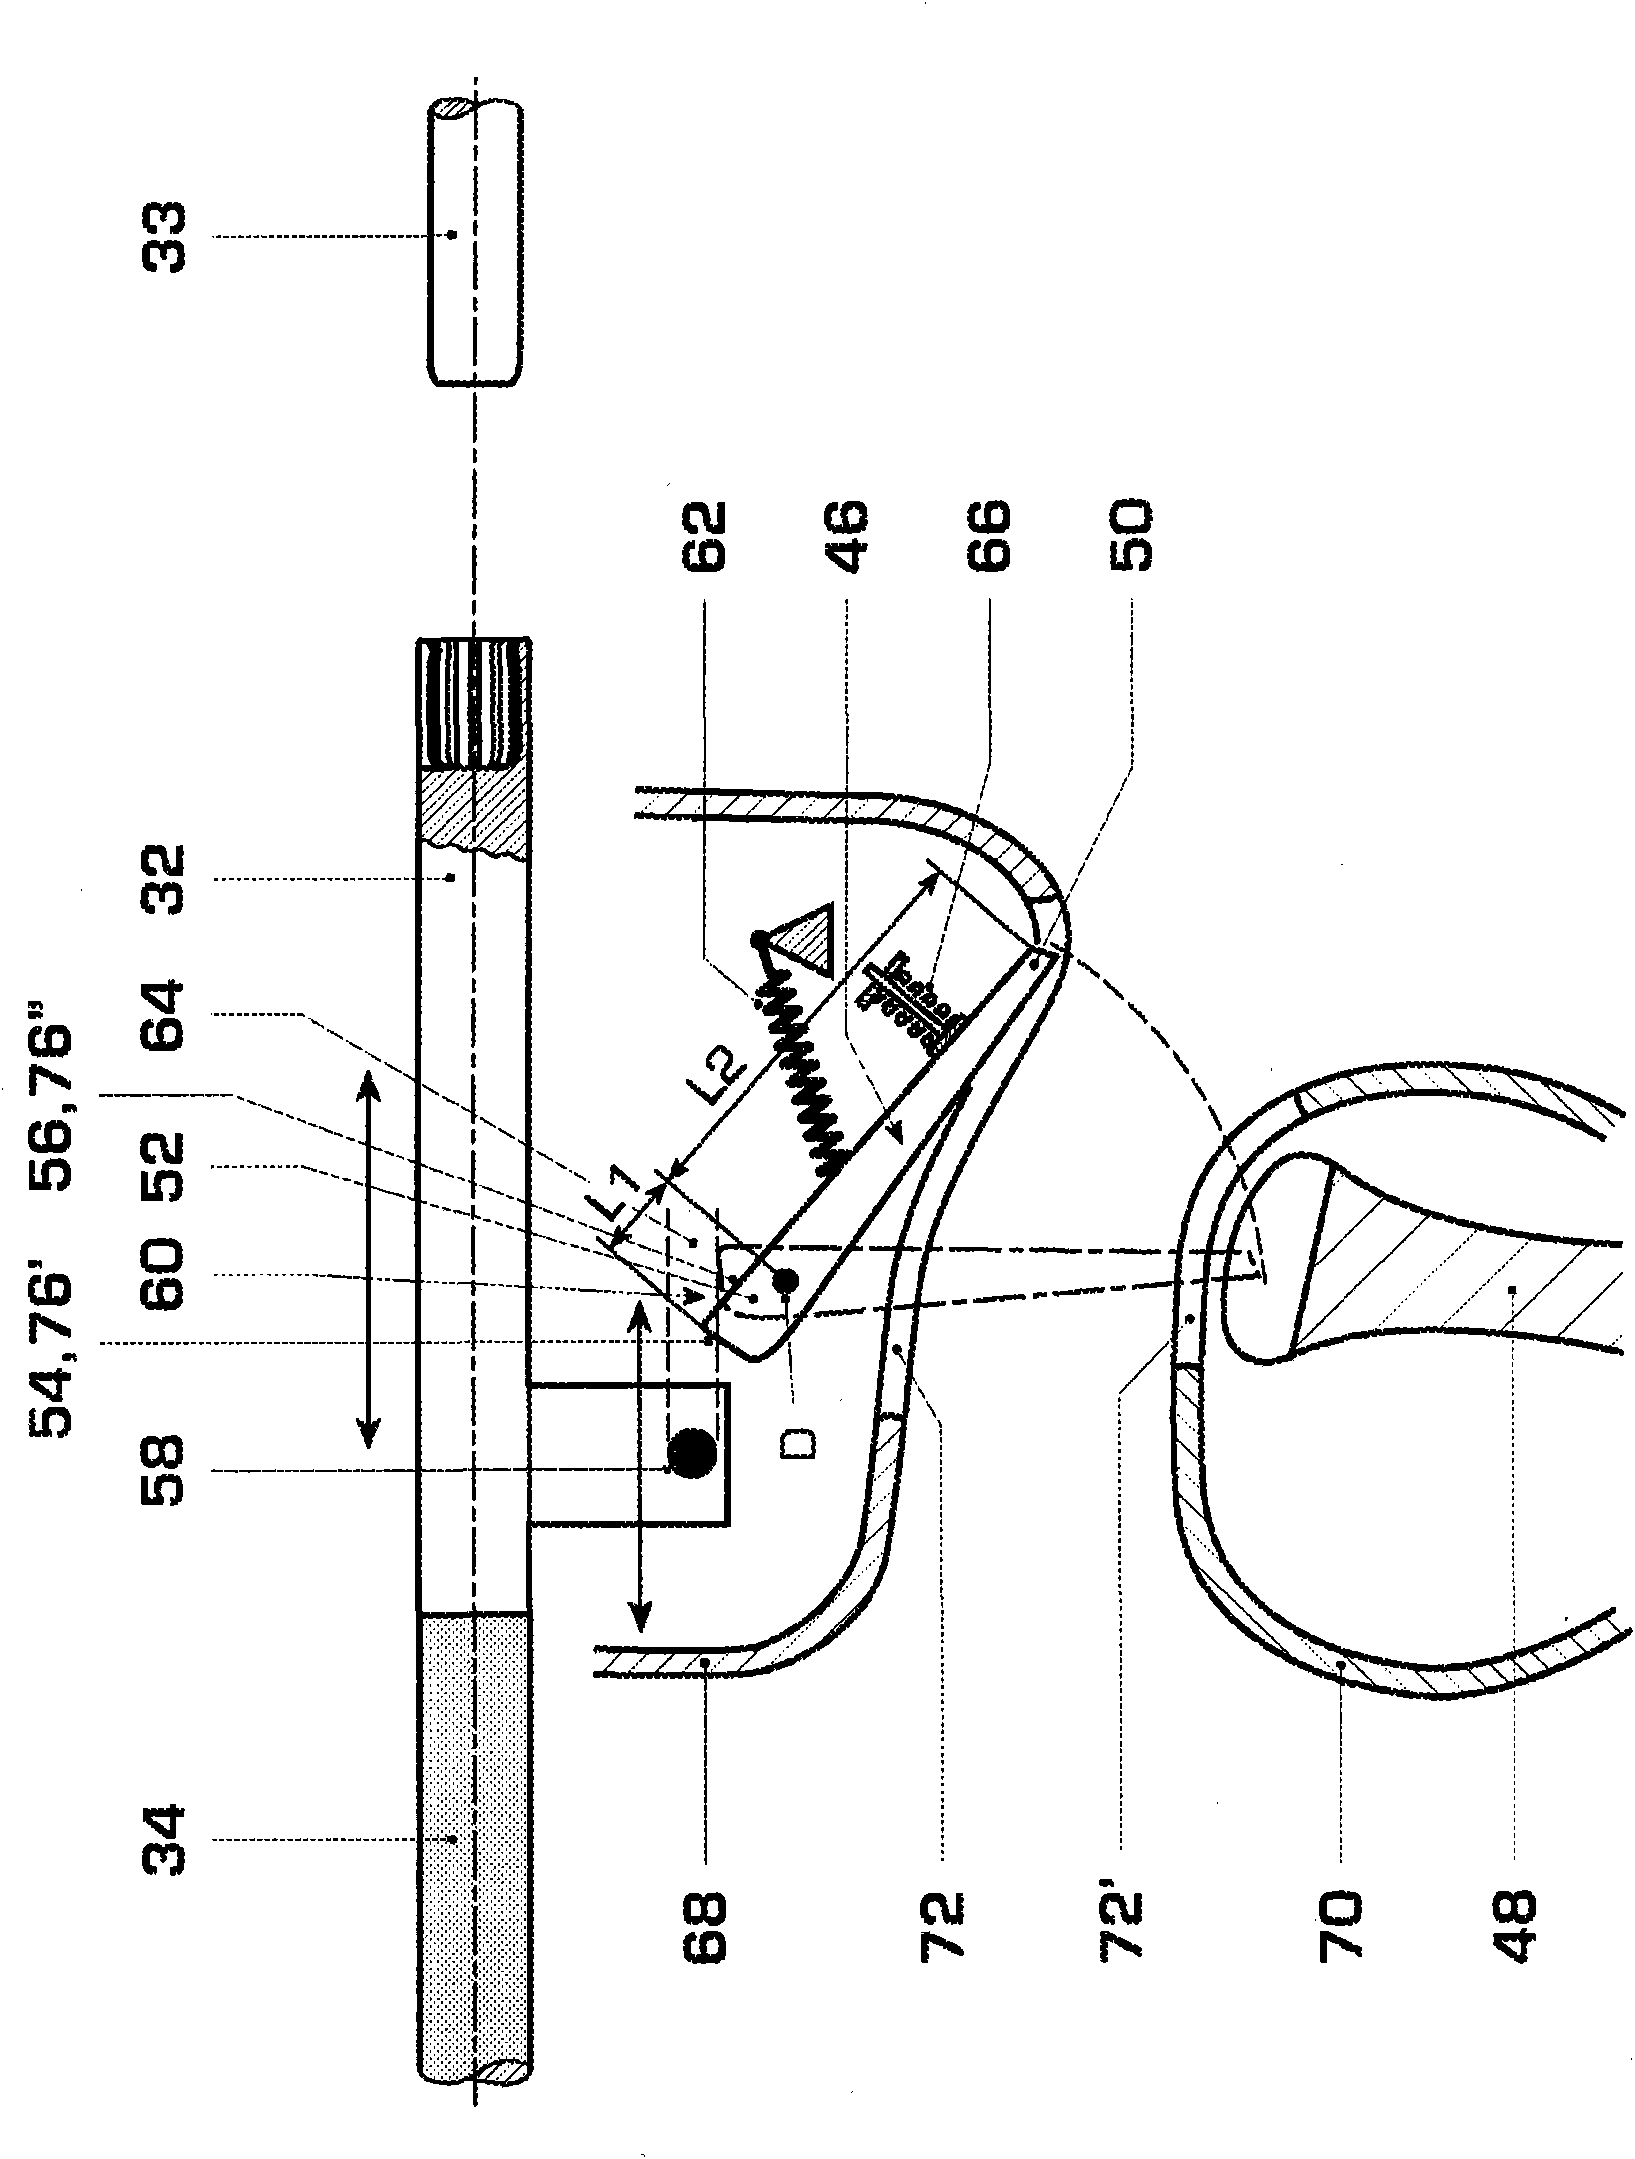 High-voltage power switch having a switch for engaging a starting resistor